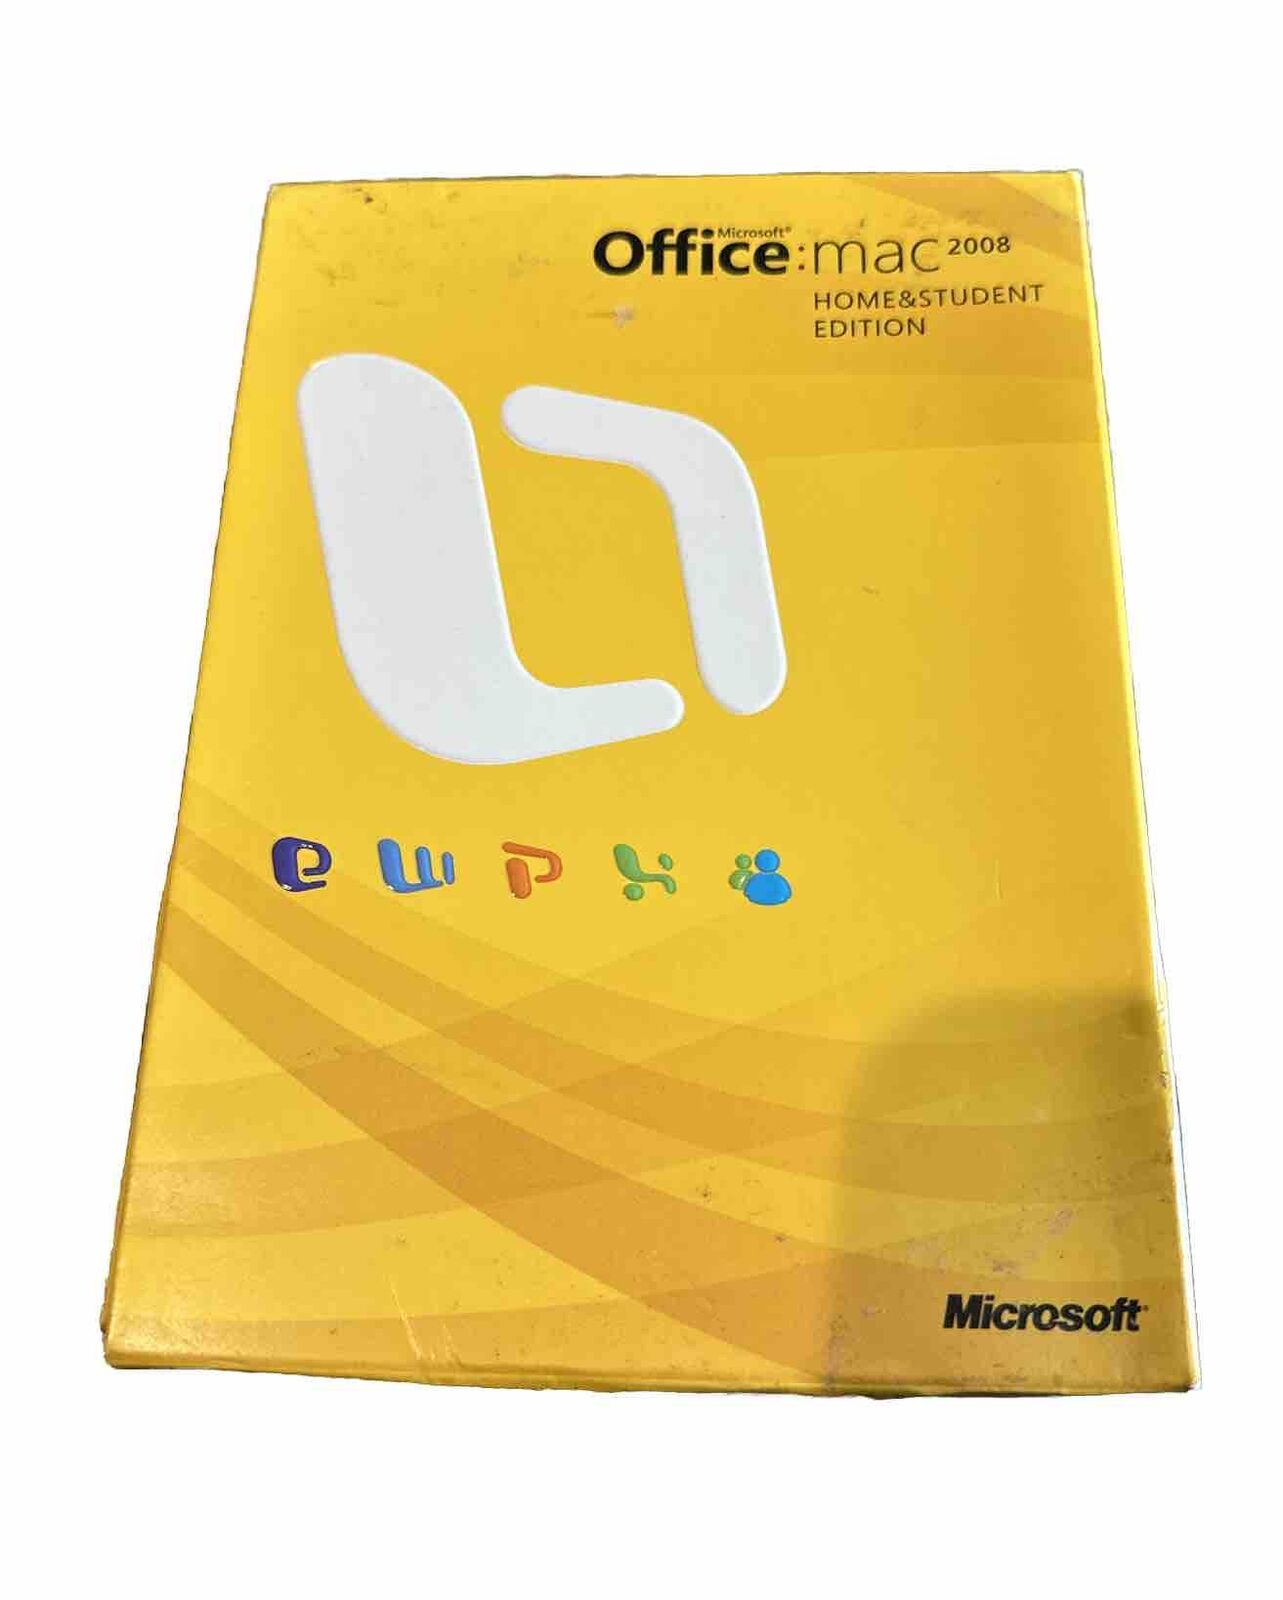 Microsoft Office 2008 Home & Student Edition for Mac w/ 3 Product Keys